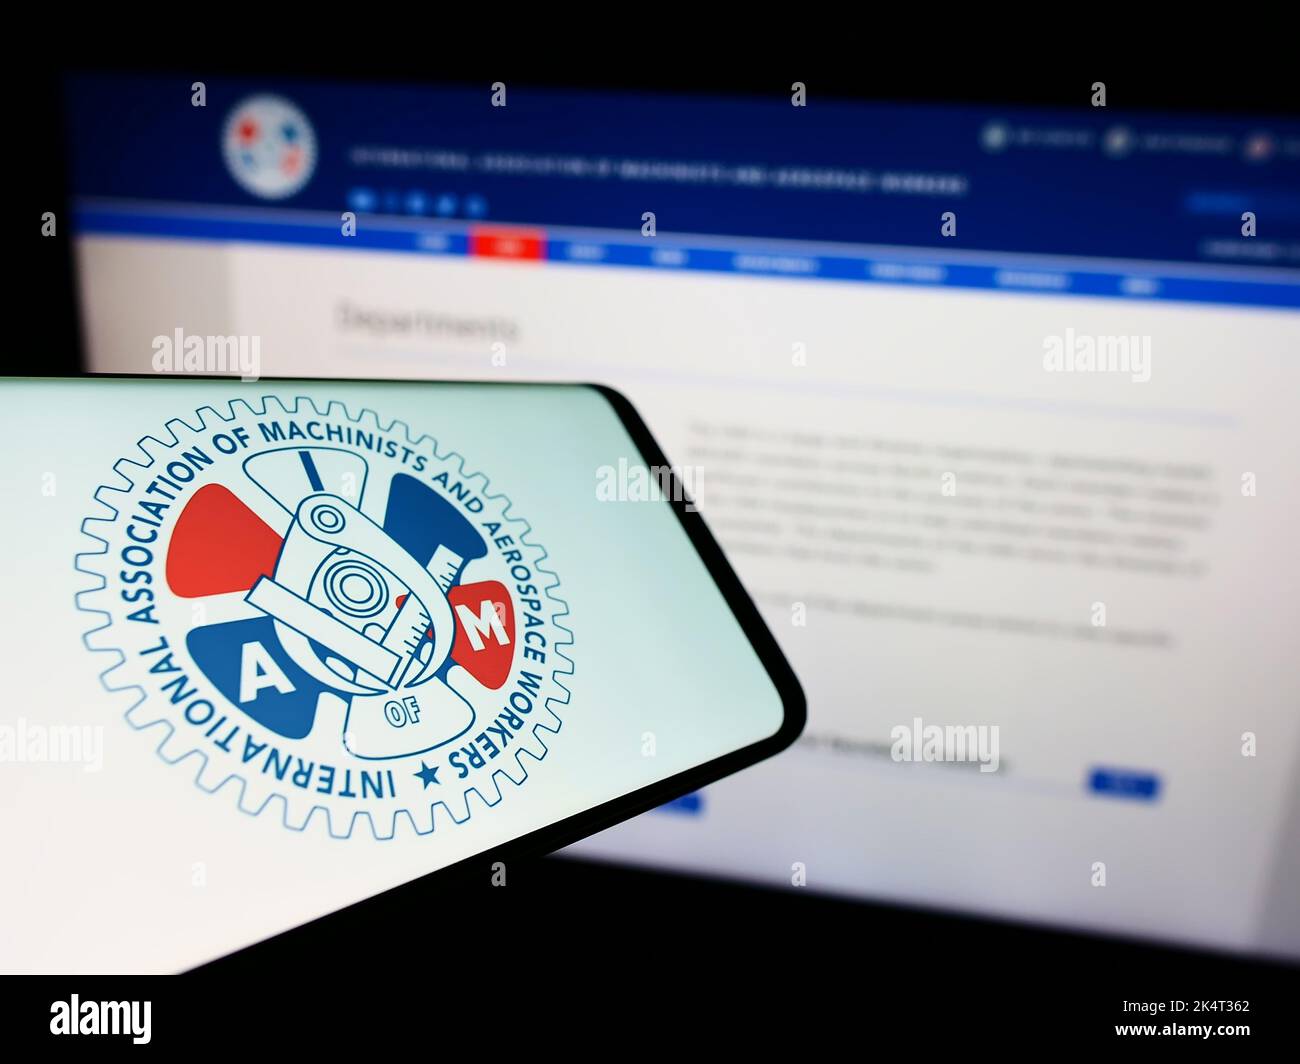 Mobile phone with logo of American-Canadian trade union IAM on screen in front of website. Focus on center-right of phone display. Stock Photo